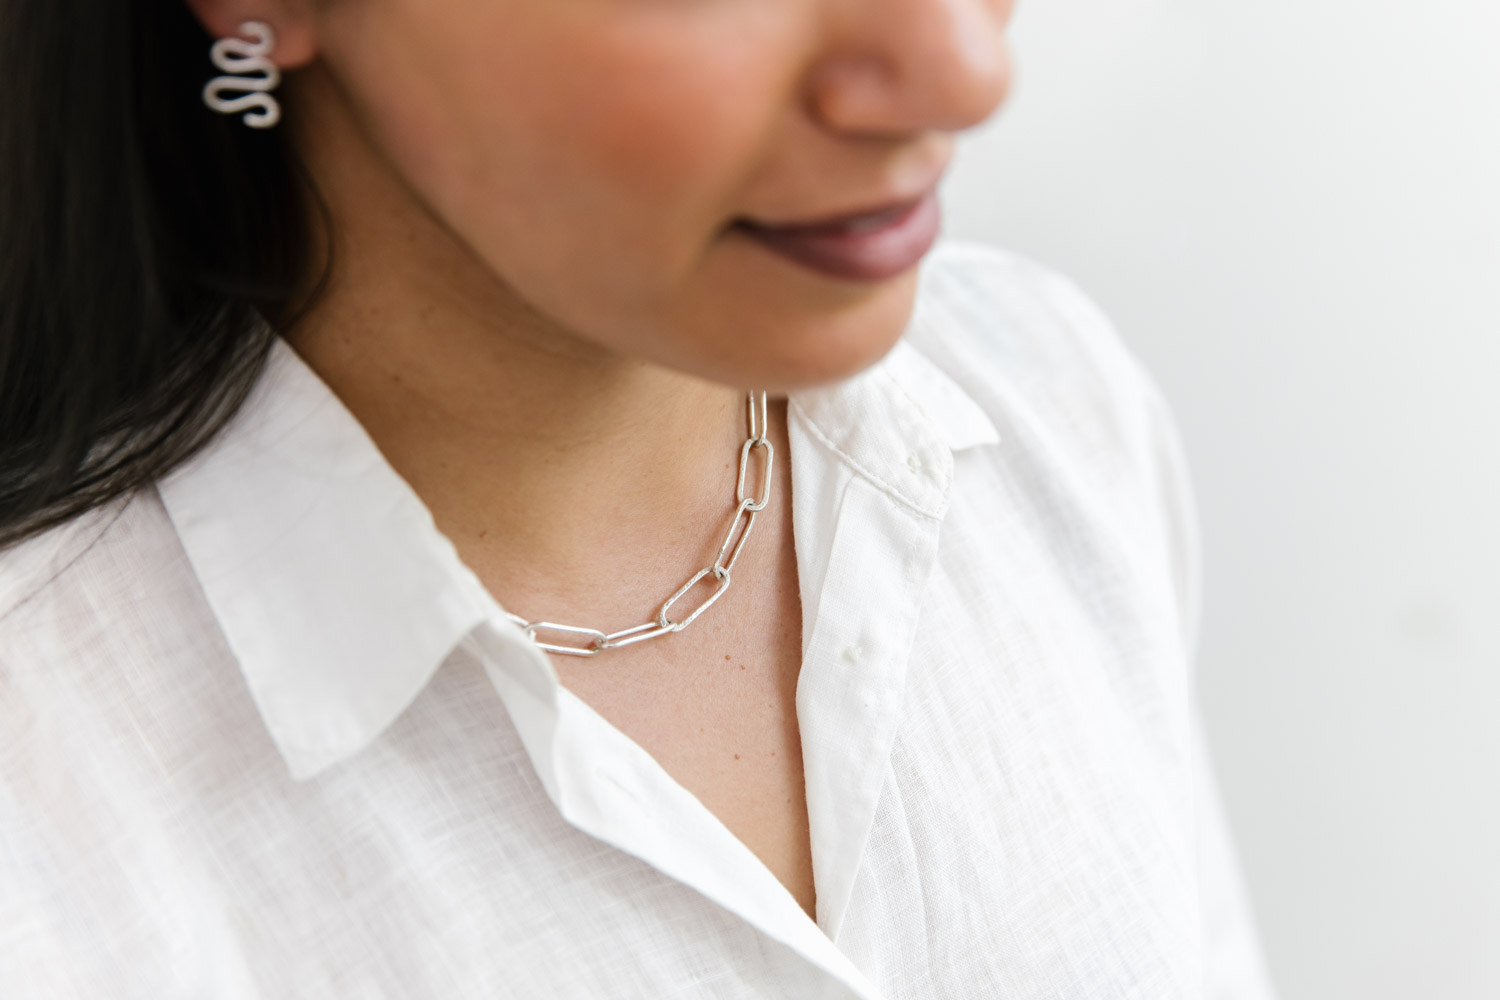 A women of colour wears a white linen shirt and a sterling silver change necklace